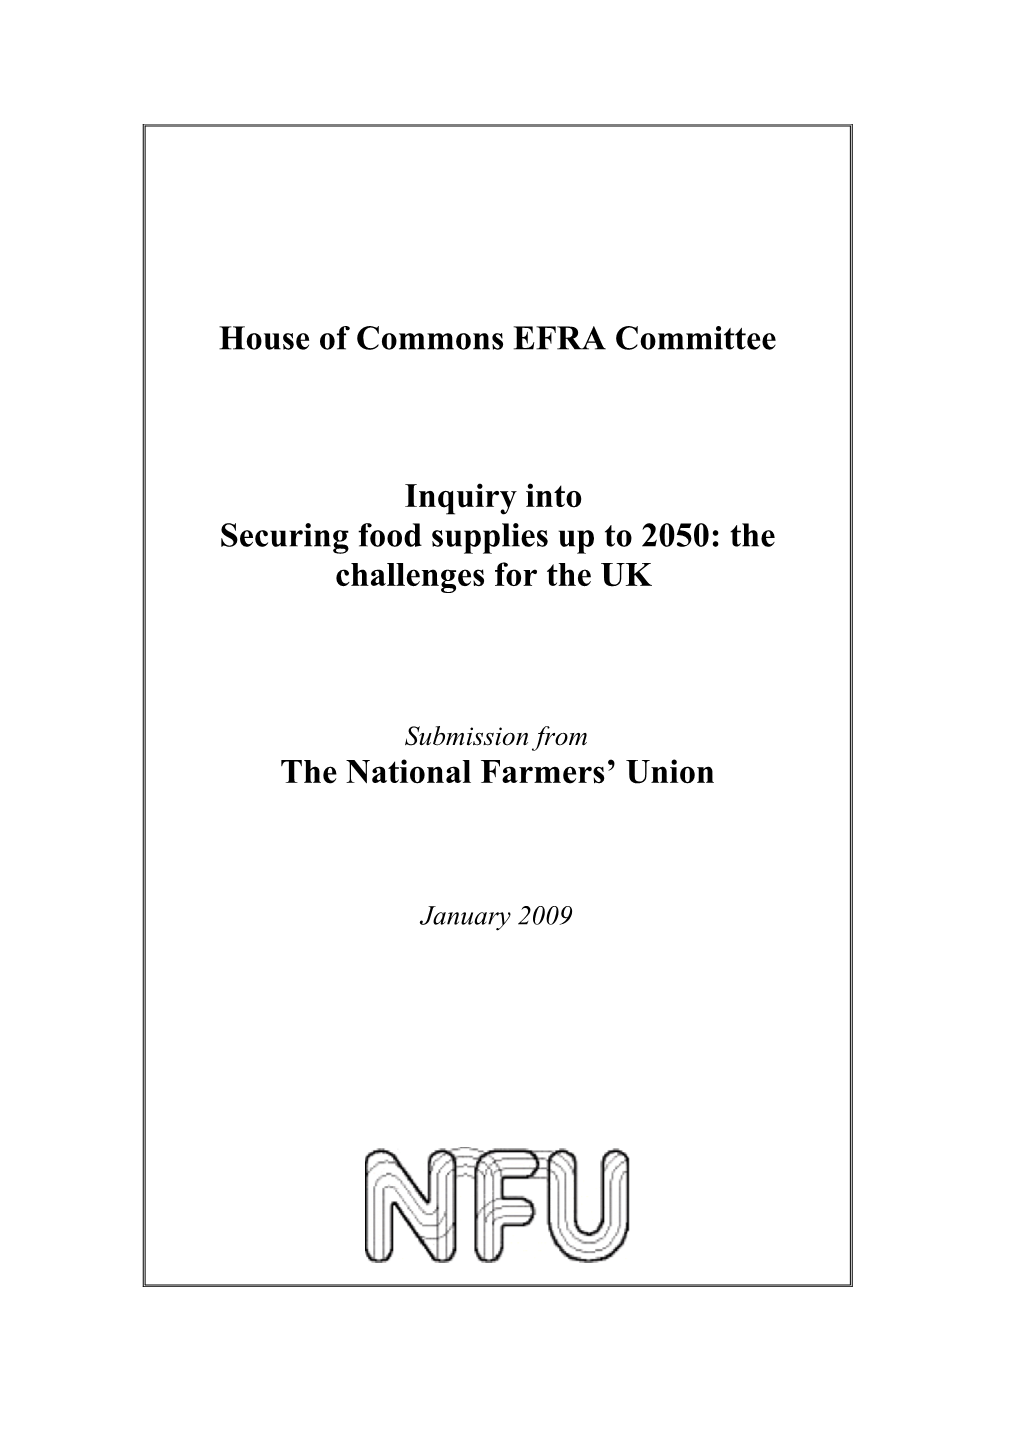 EFRA Committee Inquiry: Securing Food Supplies up to 2050: the Challenges for the UK NFU